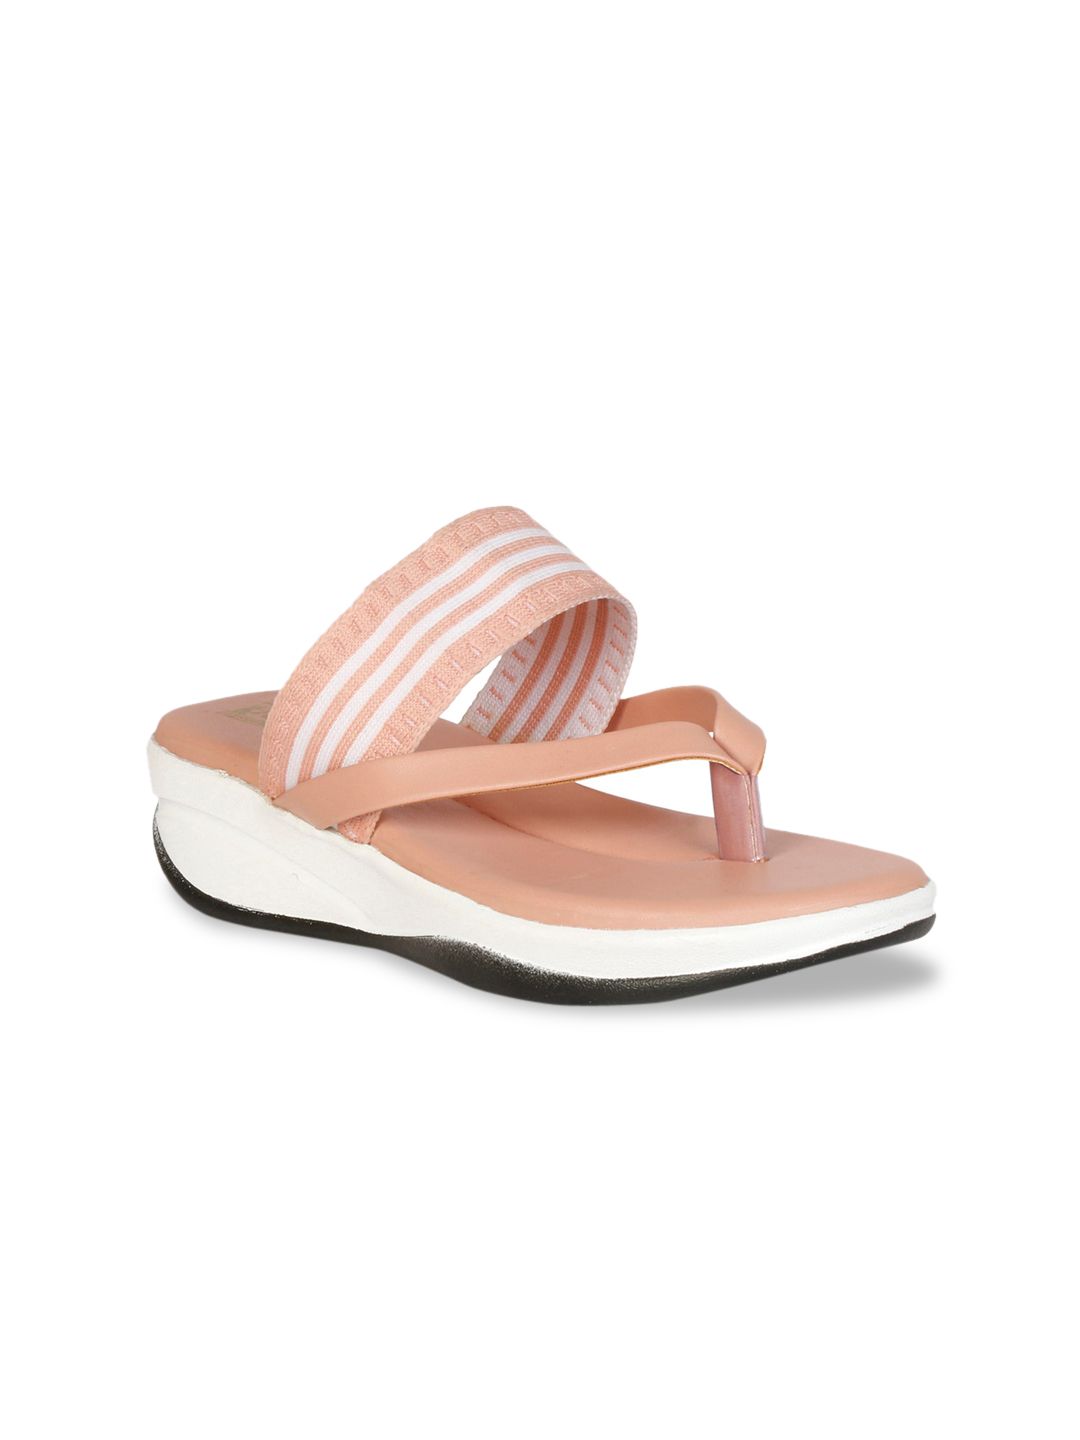 Denill Peach-Coloured and White Open-Toe Comfort Heels Price in India